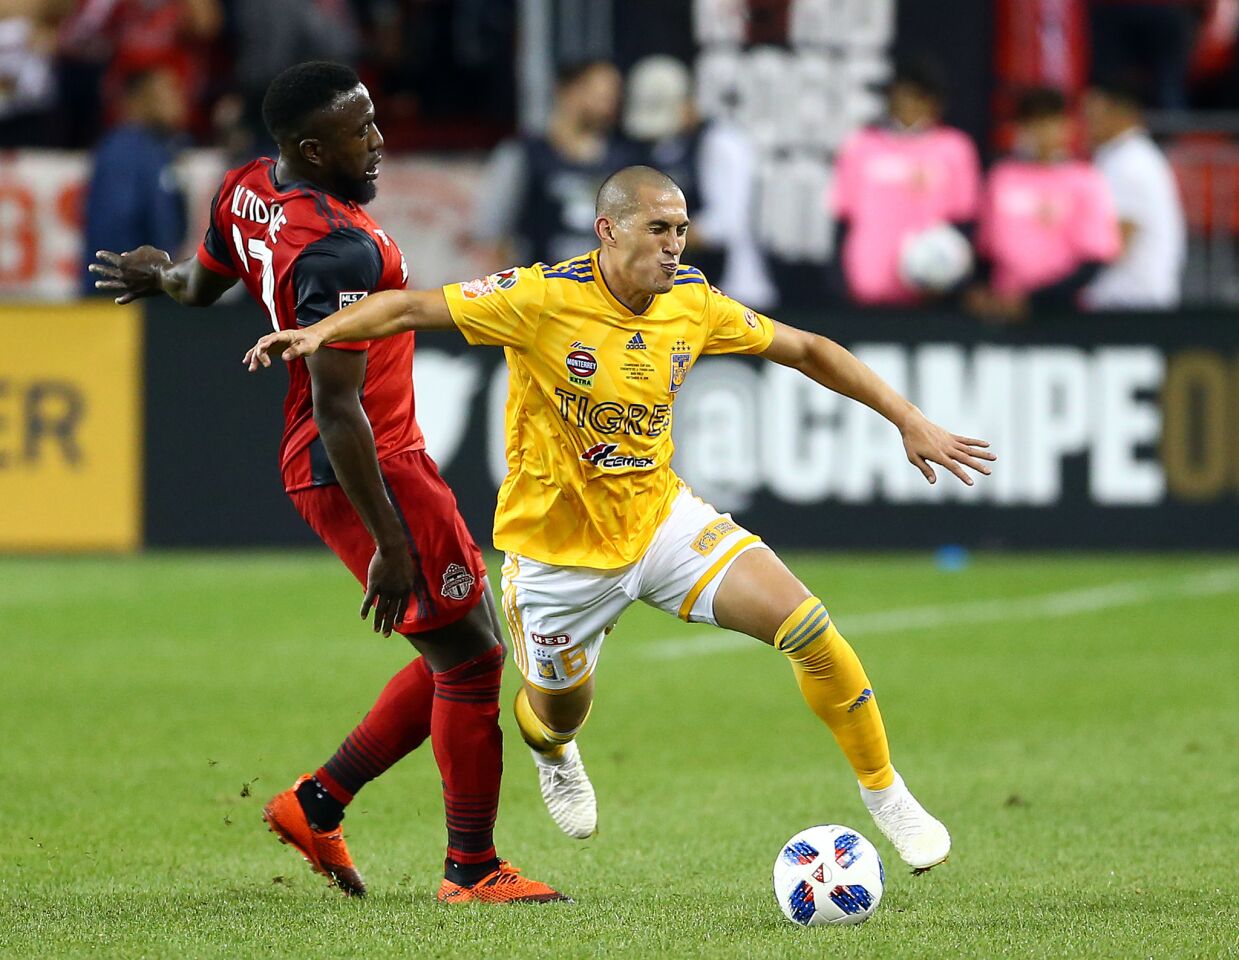 TORONTO, ON - SEPTEMBER 19: Jozy Altidore #17 of Toronto FC tackles Jorge Torres #6 of Tigres UANL during the second half of the 2018 Campeones Cup Final at BMO Field on September 19, 2018 in Toronto, Canada. (Photo by Vaughn Ridley/Getty Images) ** OUTS - ELSENT, FPG, CM - OUTS * NM, PH, VA if sourced by CT, LA or MoD **